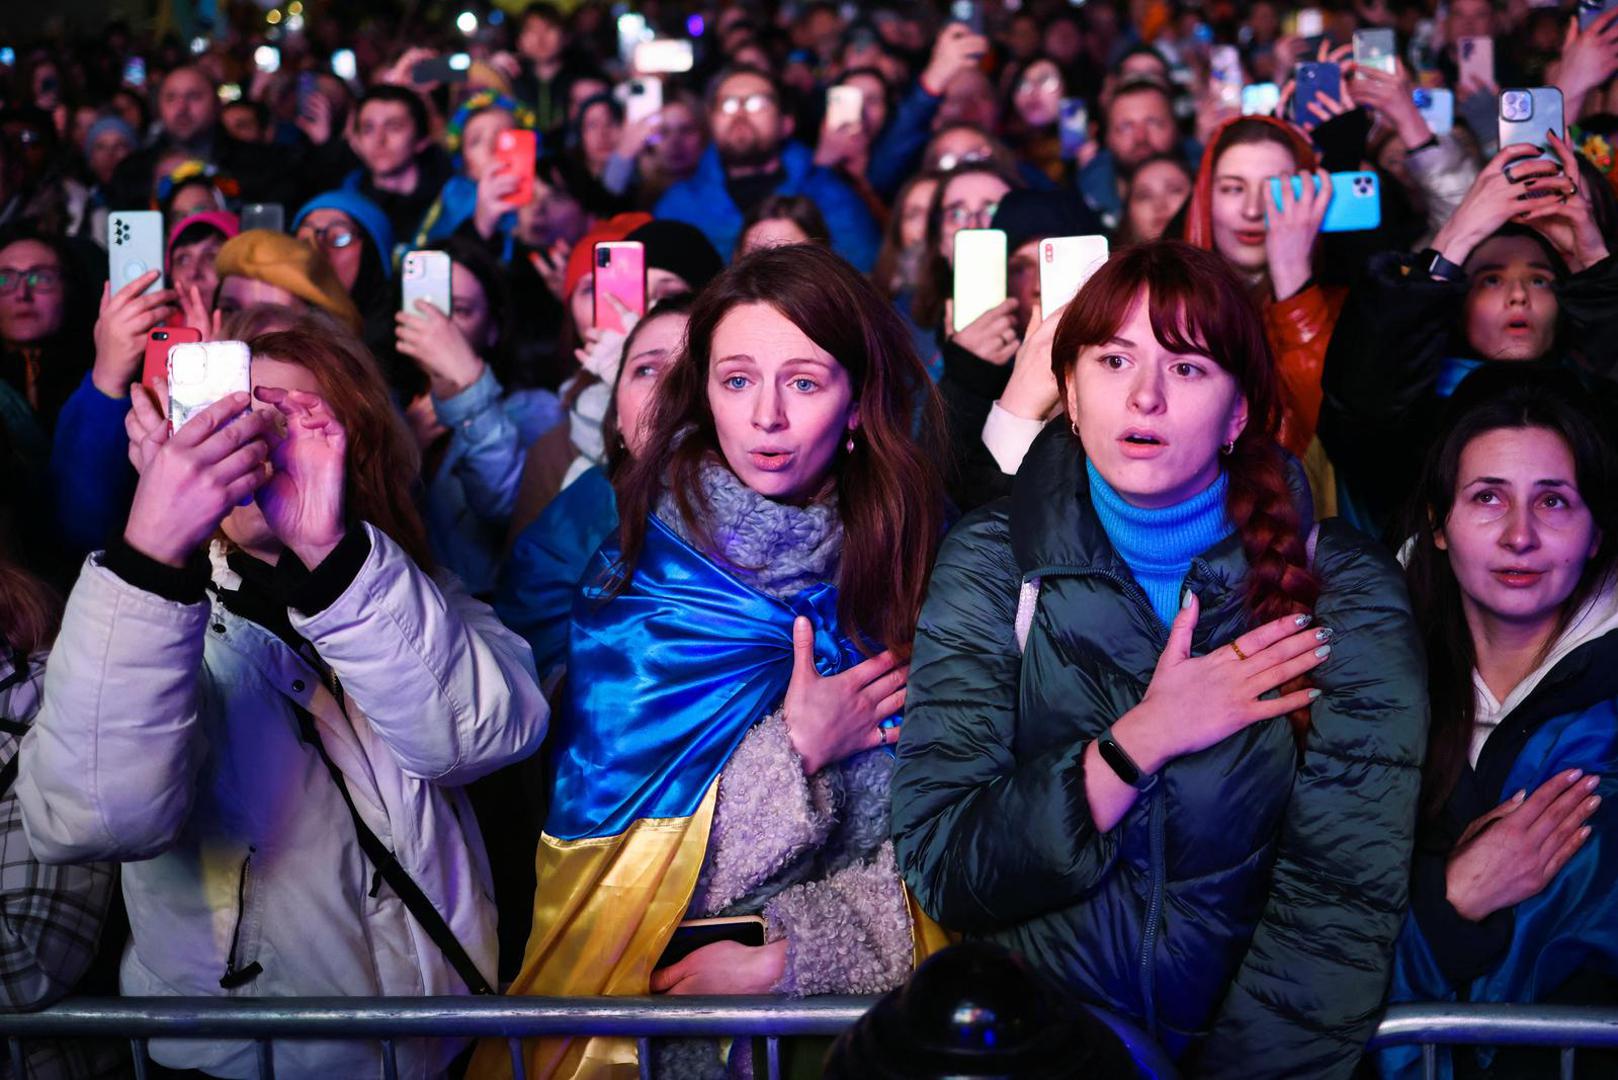 People attend a vigil for Ukraine held on the anniversary of the conflict with Russia, at Trafalgar Square in London, Britain February 23, 2023. REUTERS/Henry Nicholls Photo: Henry Nicholls/REUTERS